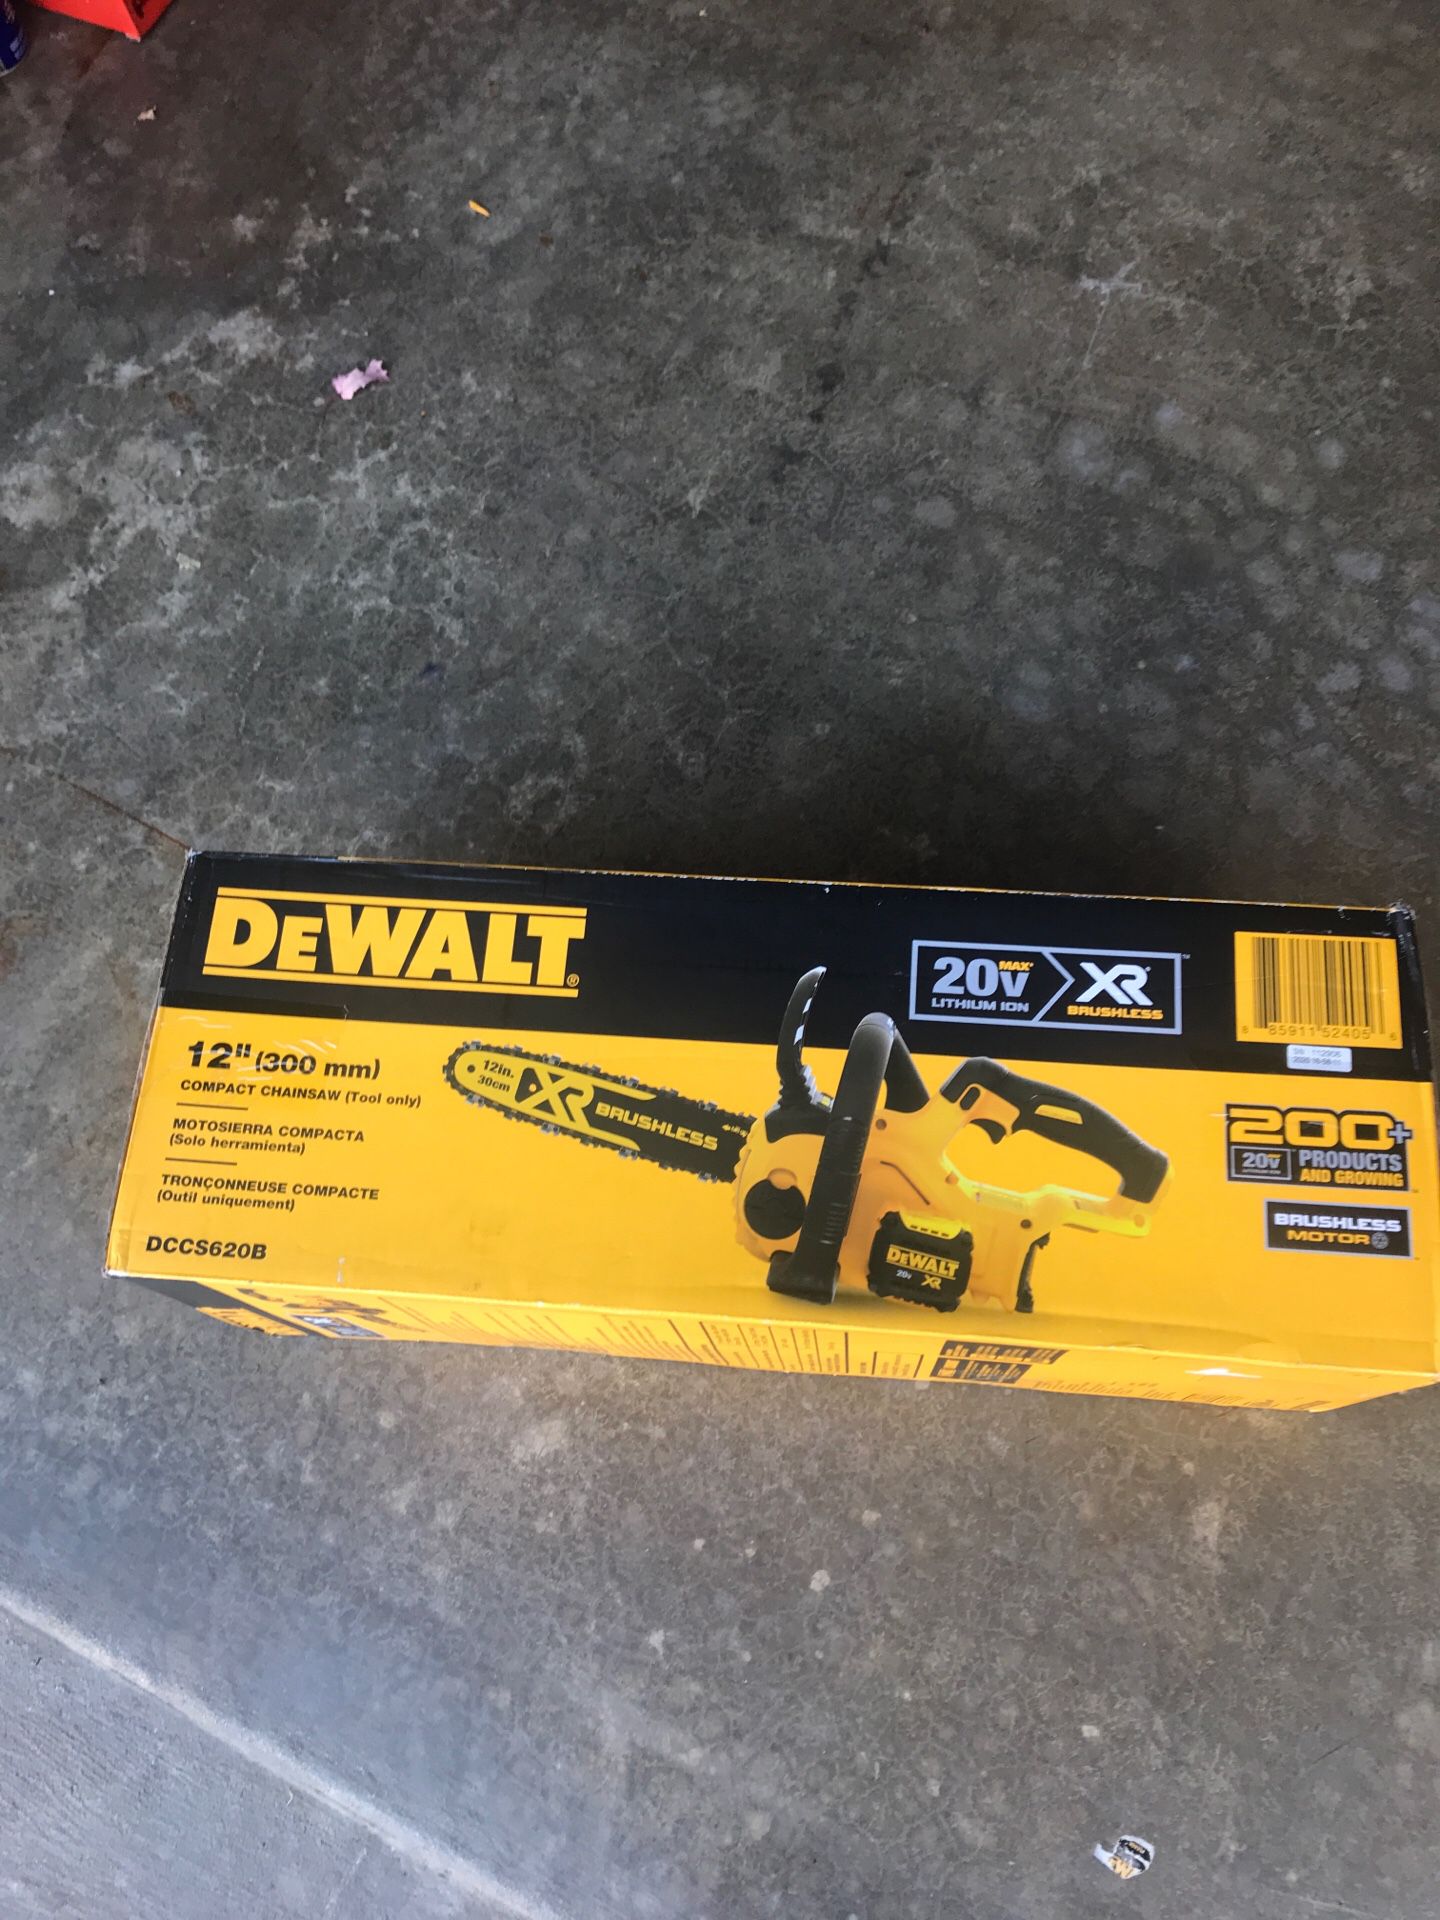 Dewalt 12” 20vmax brushless compact chainsaw tool only